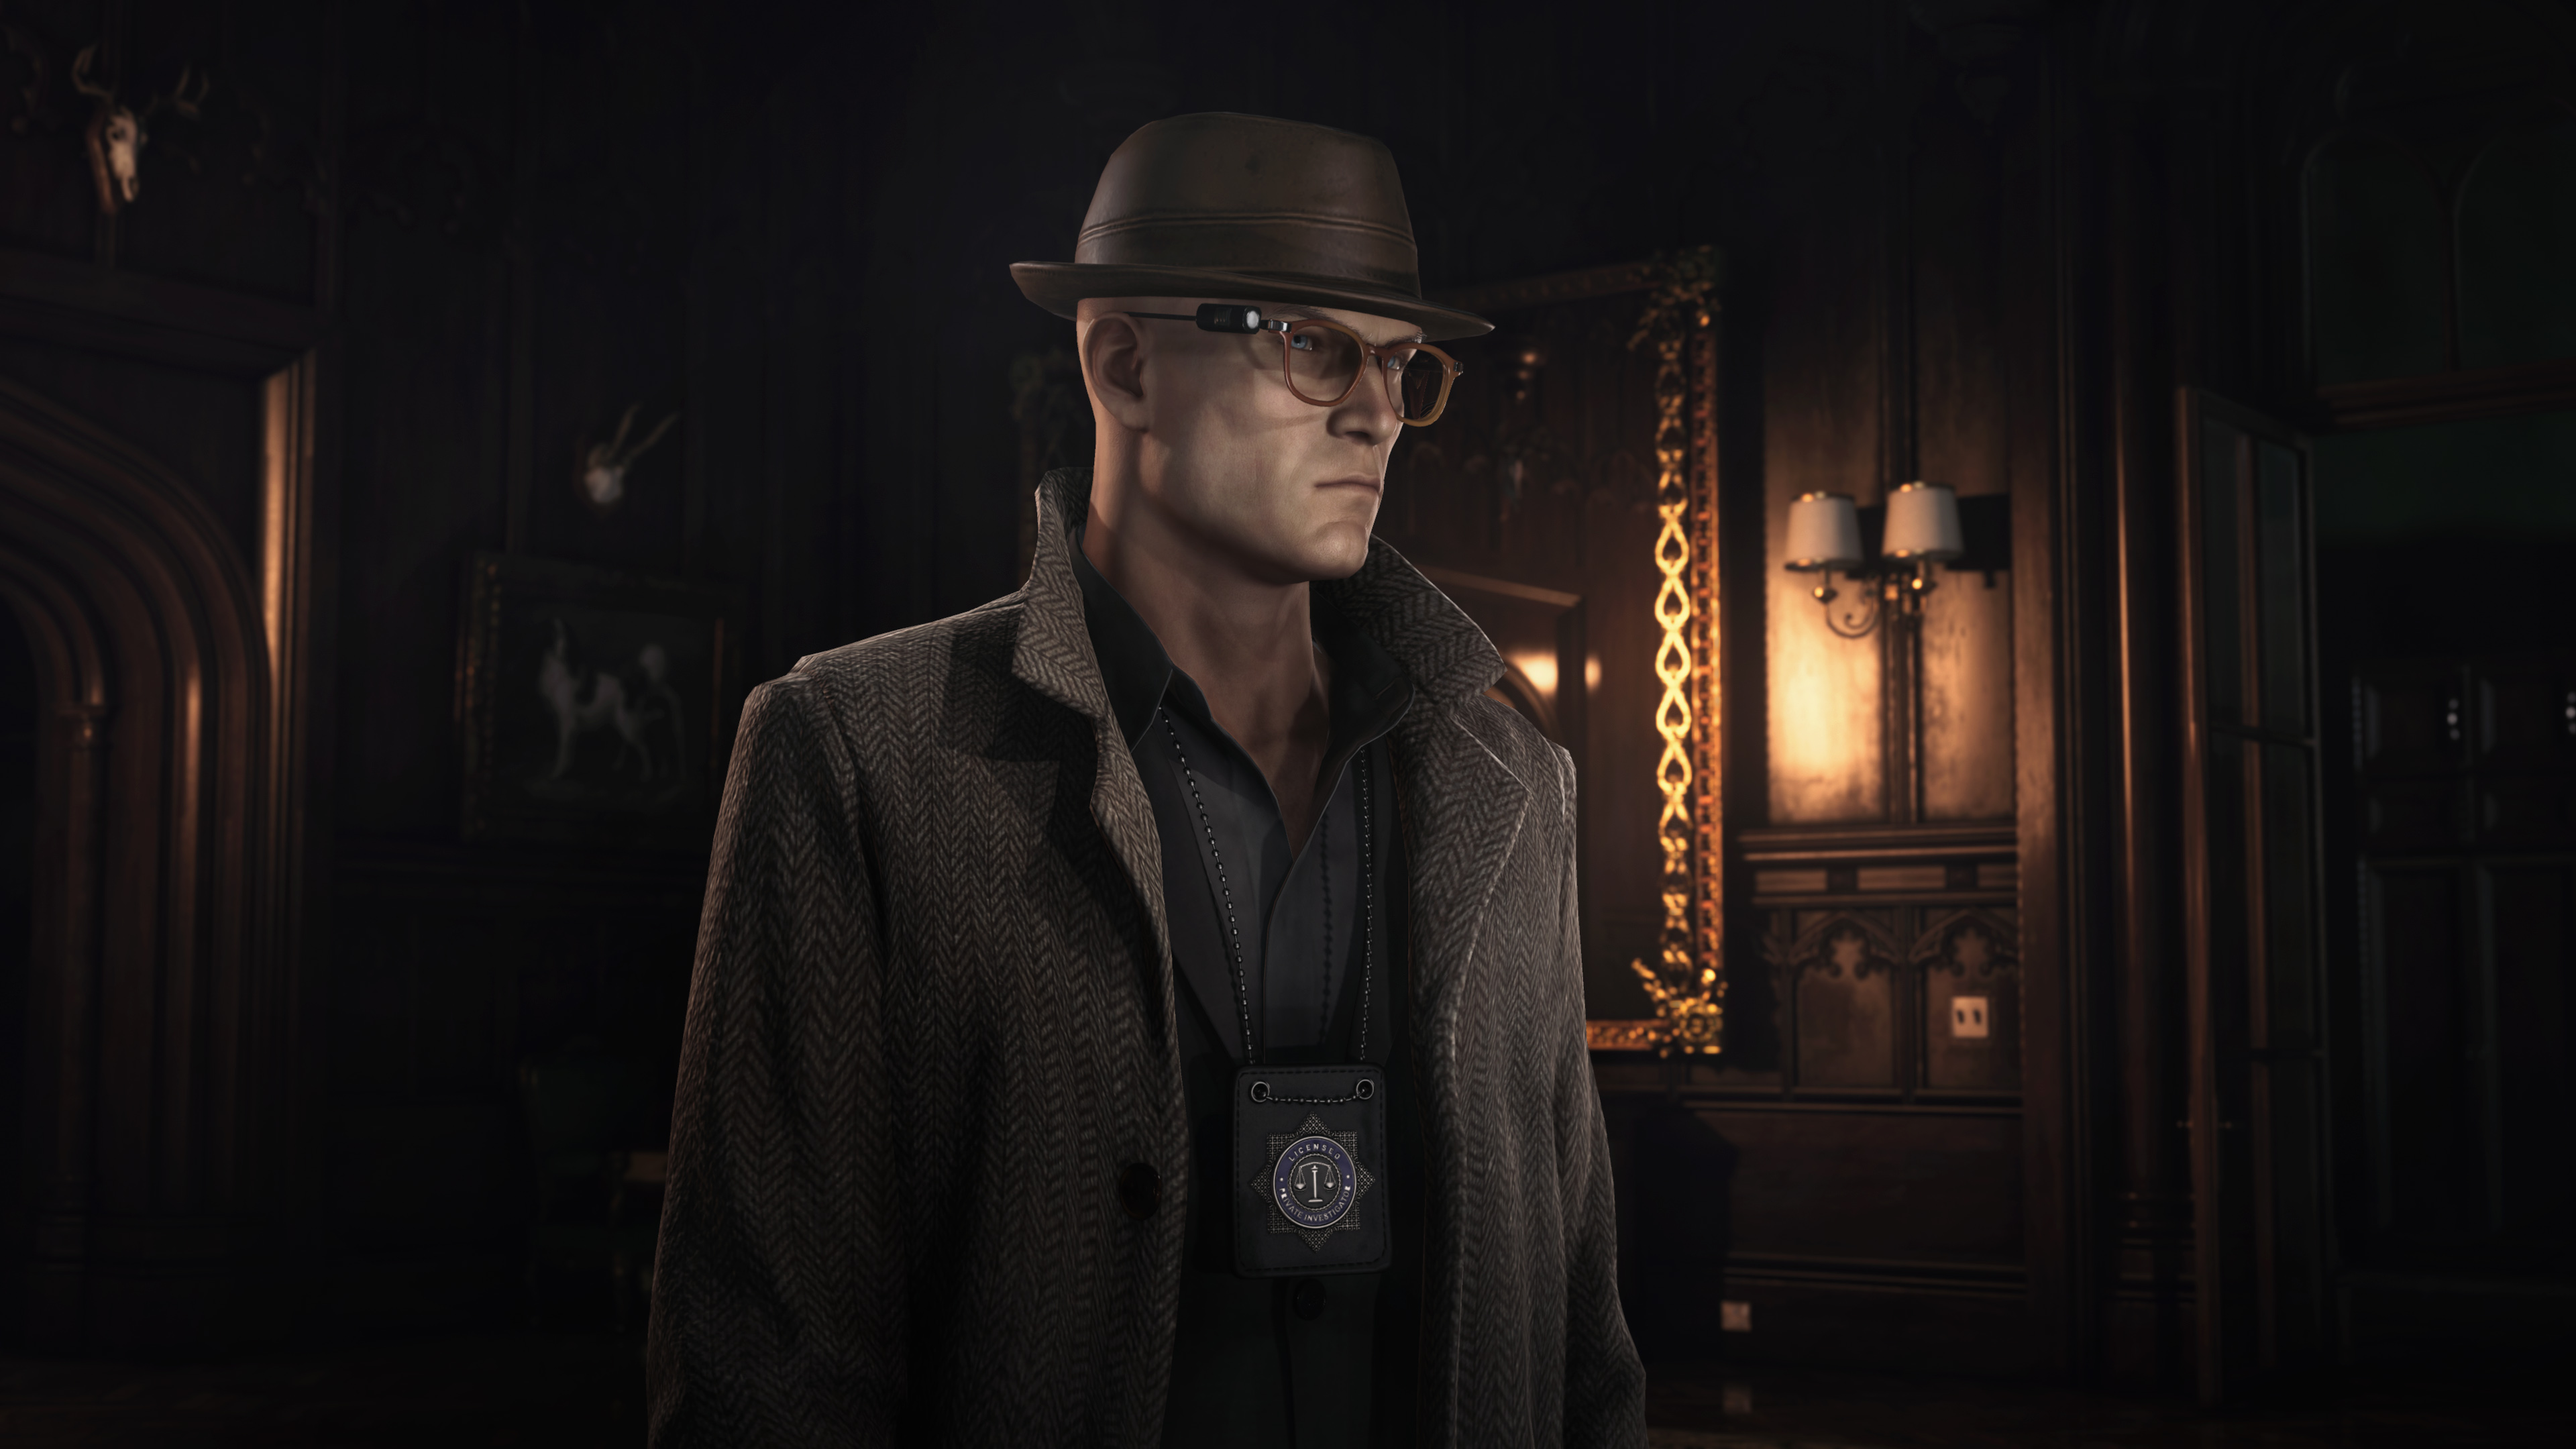 Agent 47 disguised as a detective